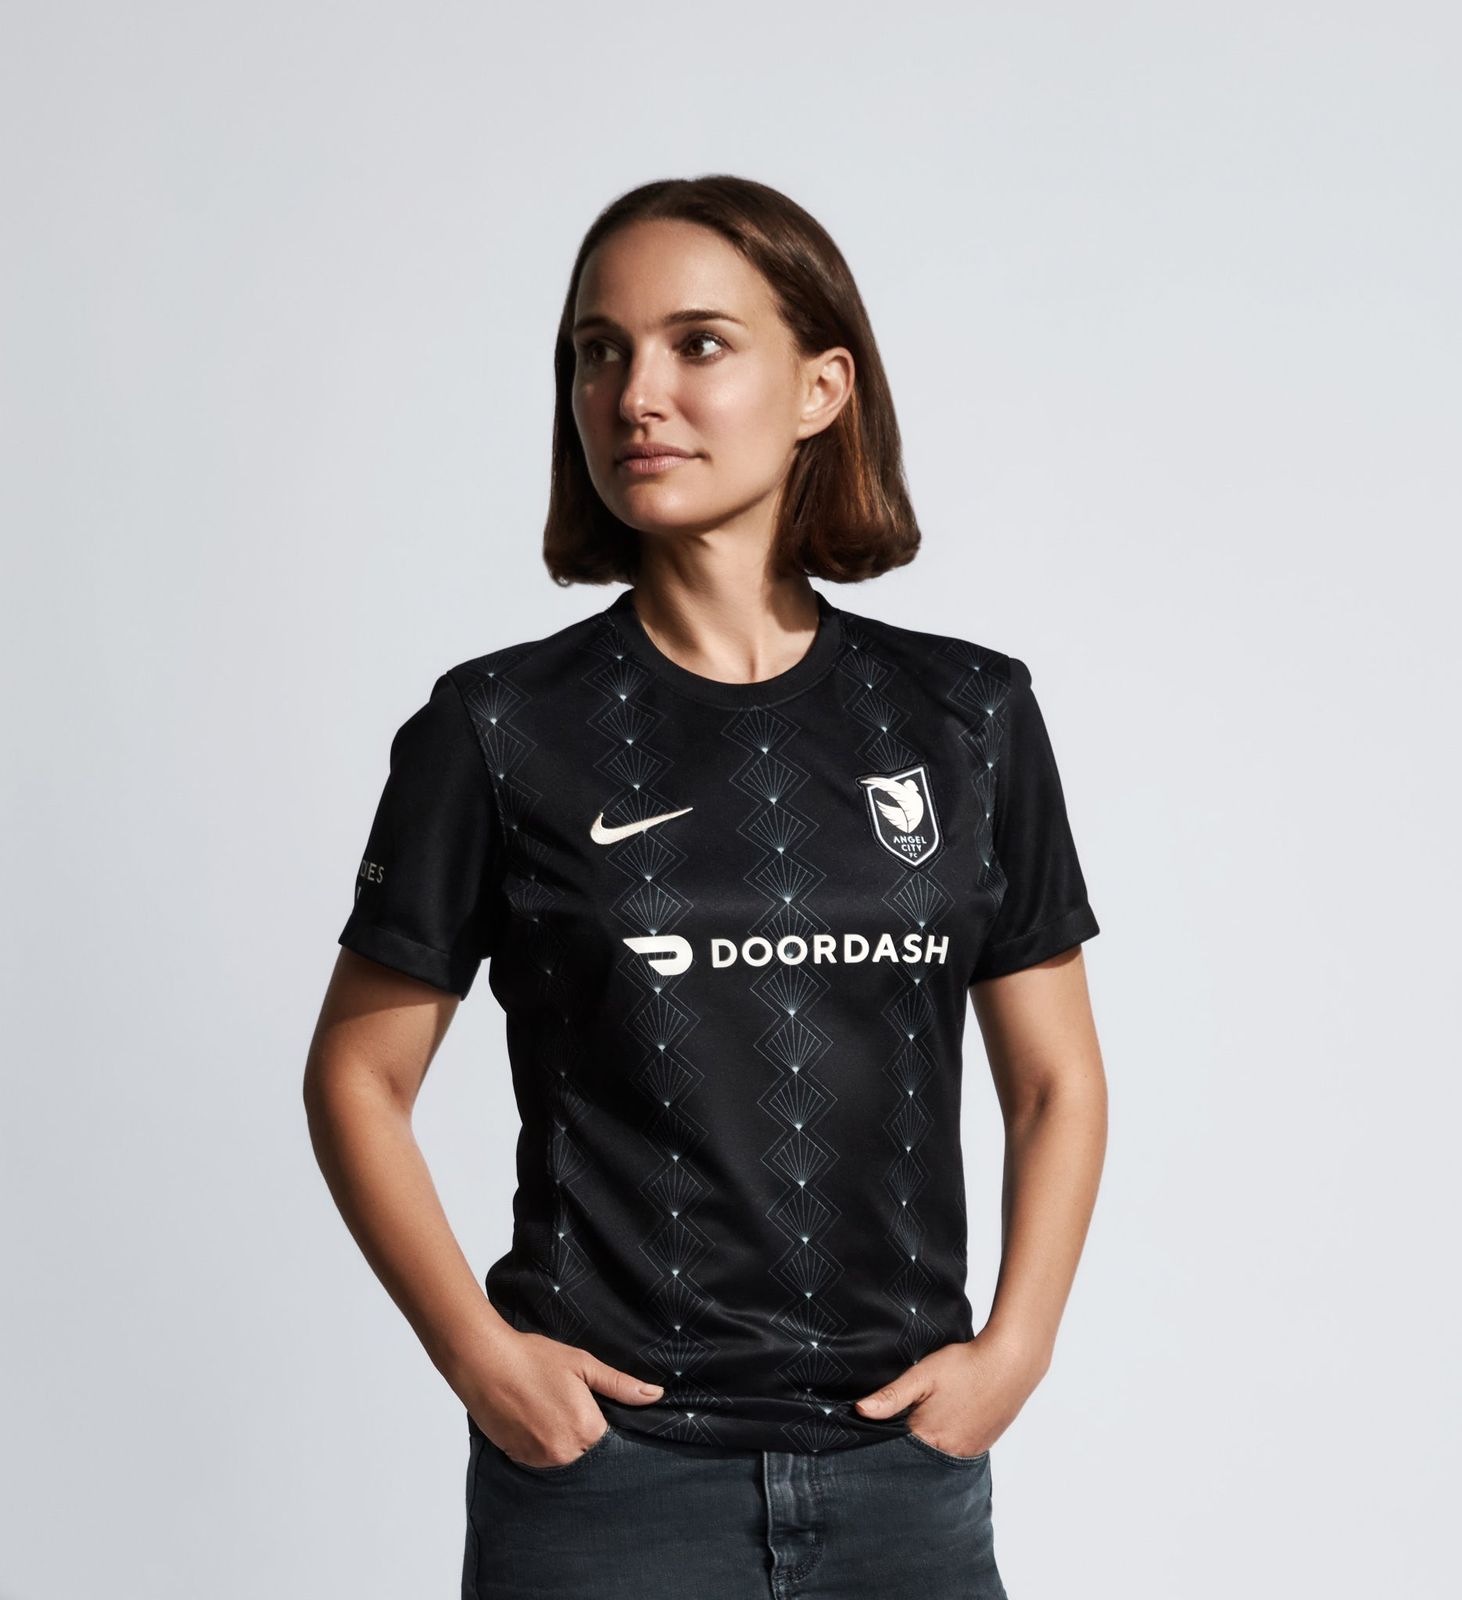 Actresses, businesswomen and athletes: The founders and investors of Angel City FC ahead of the debut in the NWSL